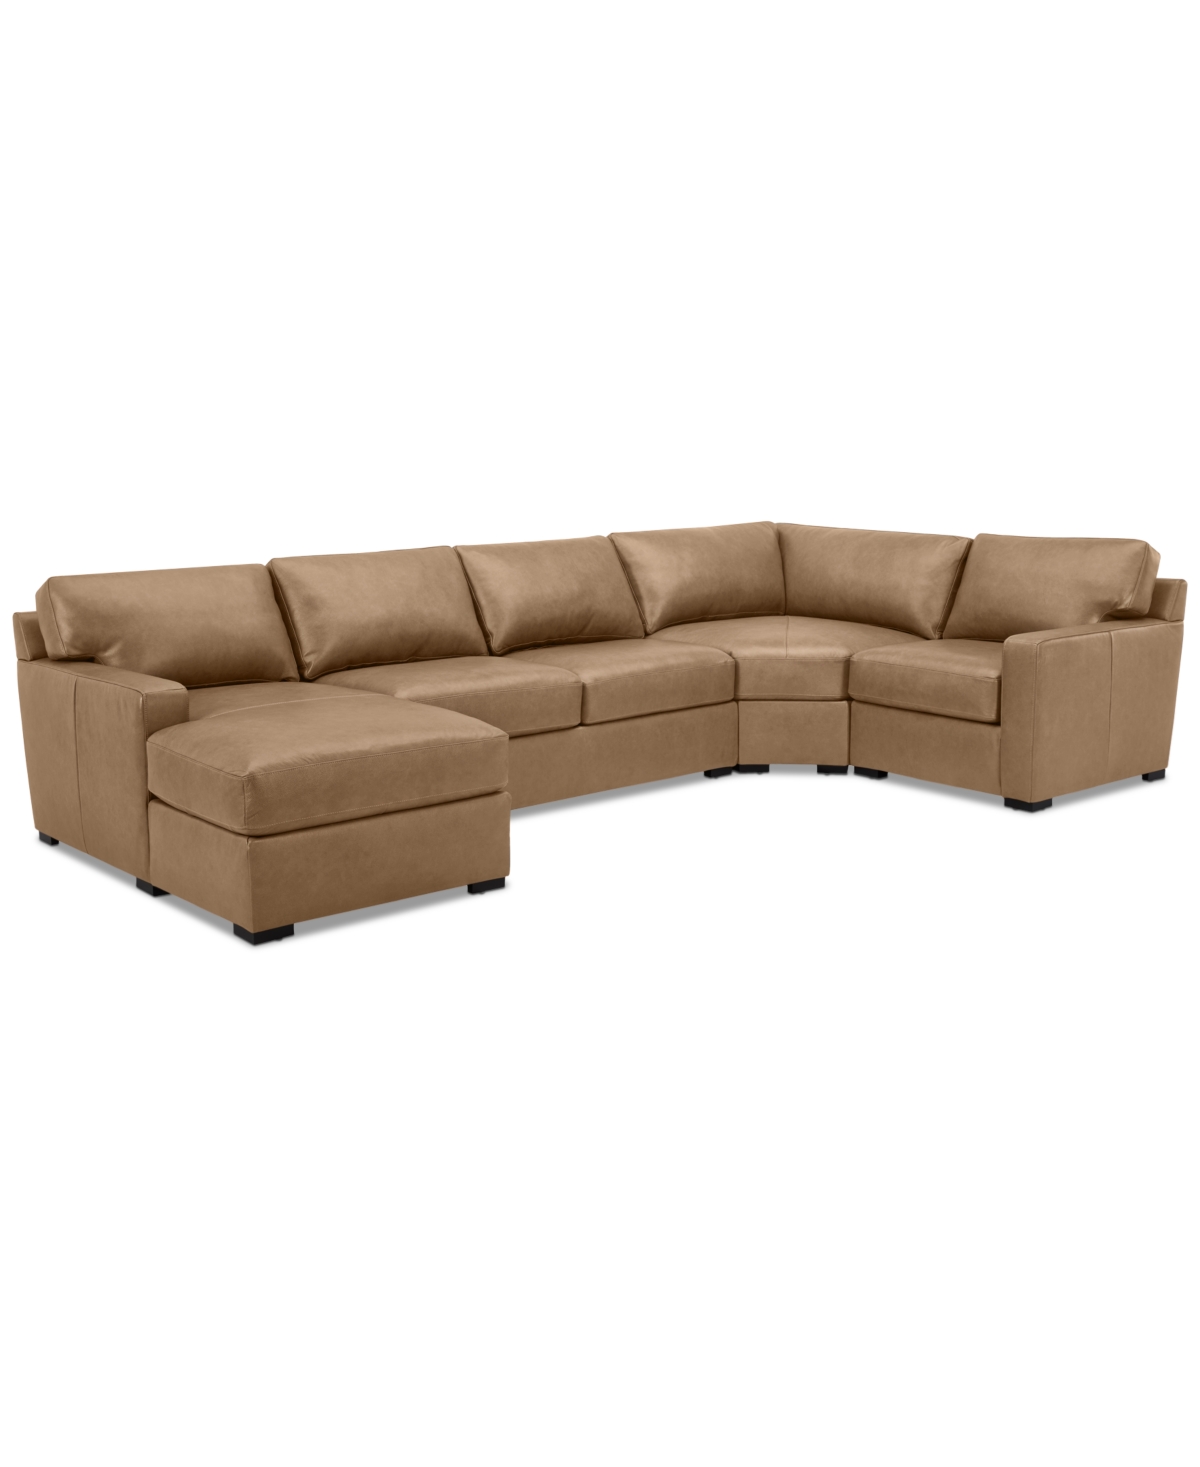 Macy's Radley 148" 4-pc. Leather Wedge Modular Chaise Sectional, Created For  In Light Natural